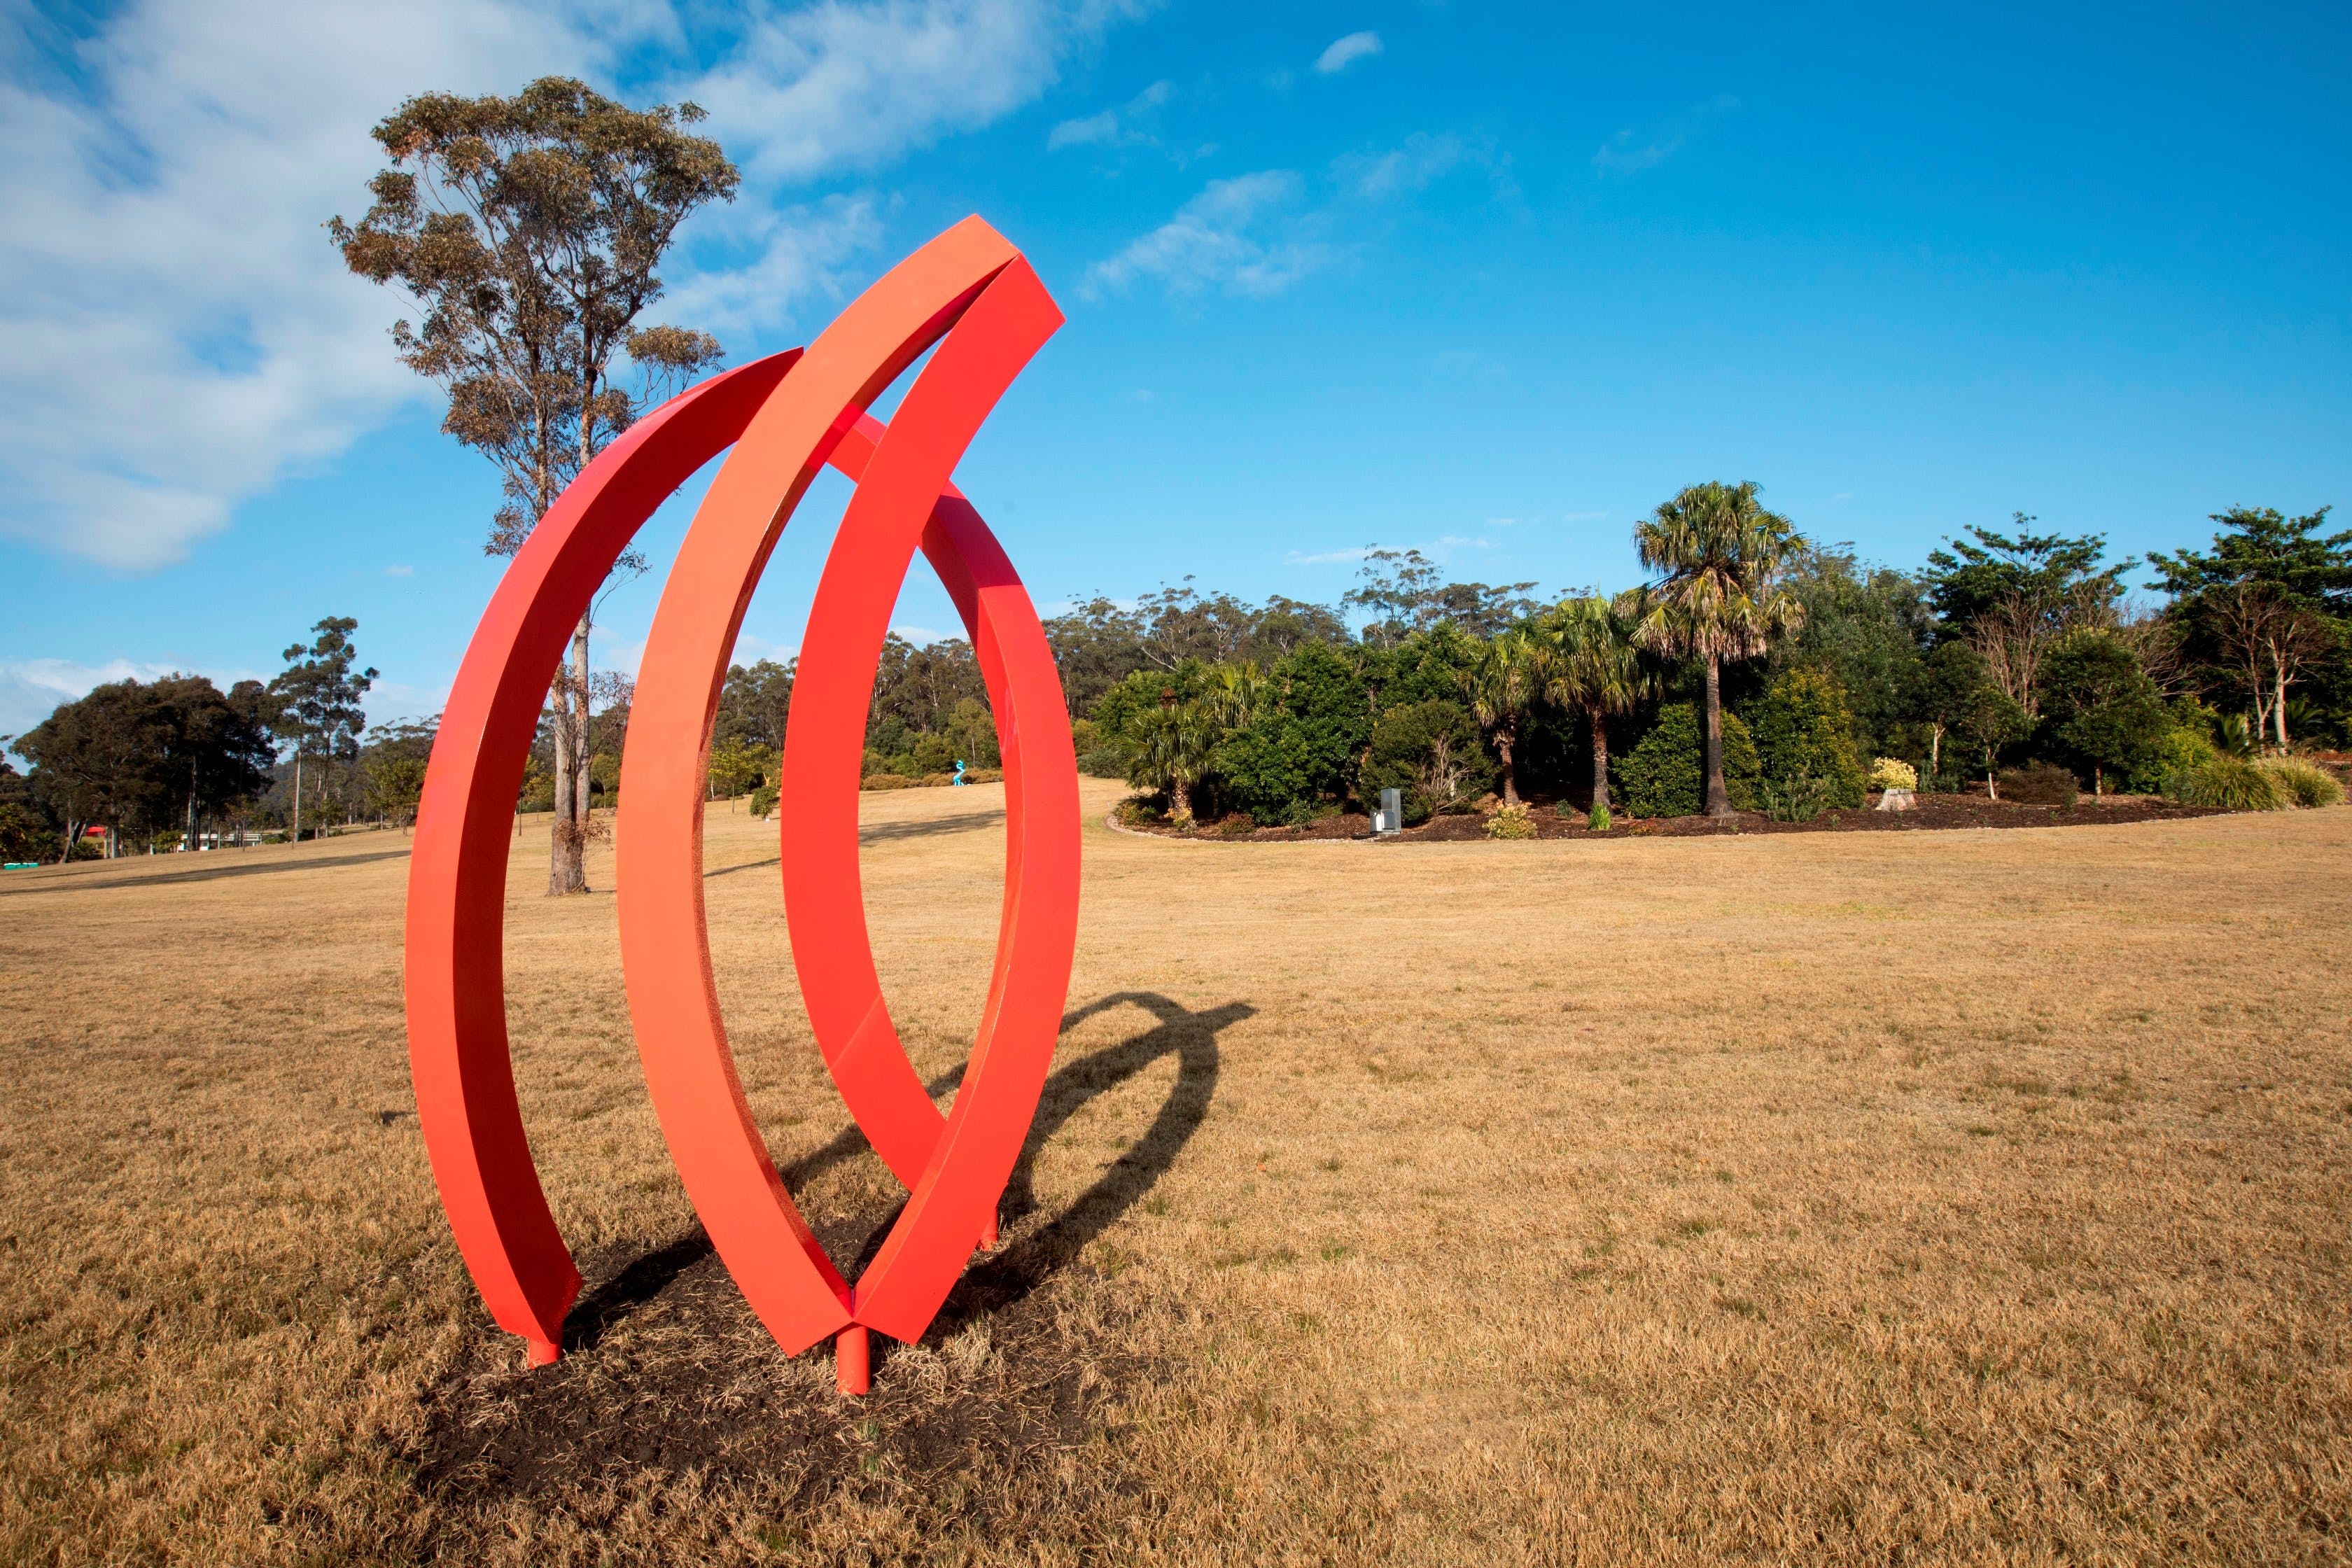 Sculpture for Clyde - Accommodation Brunswick Heads